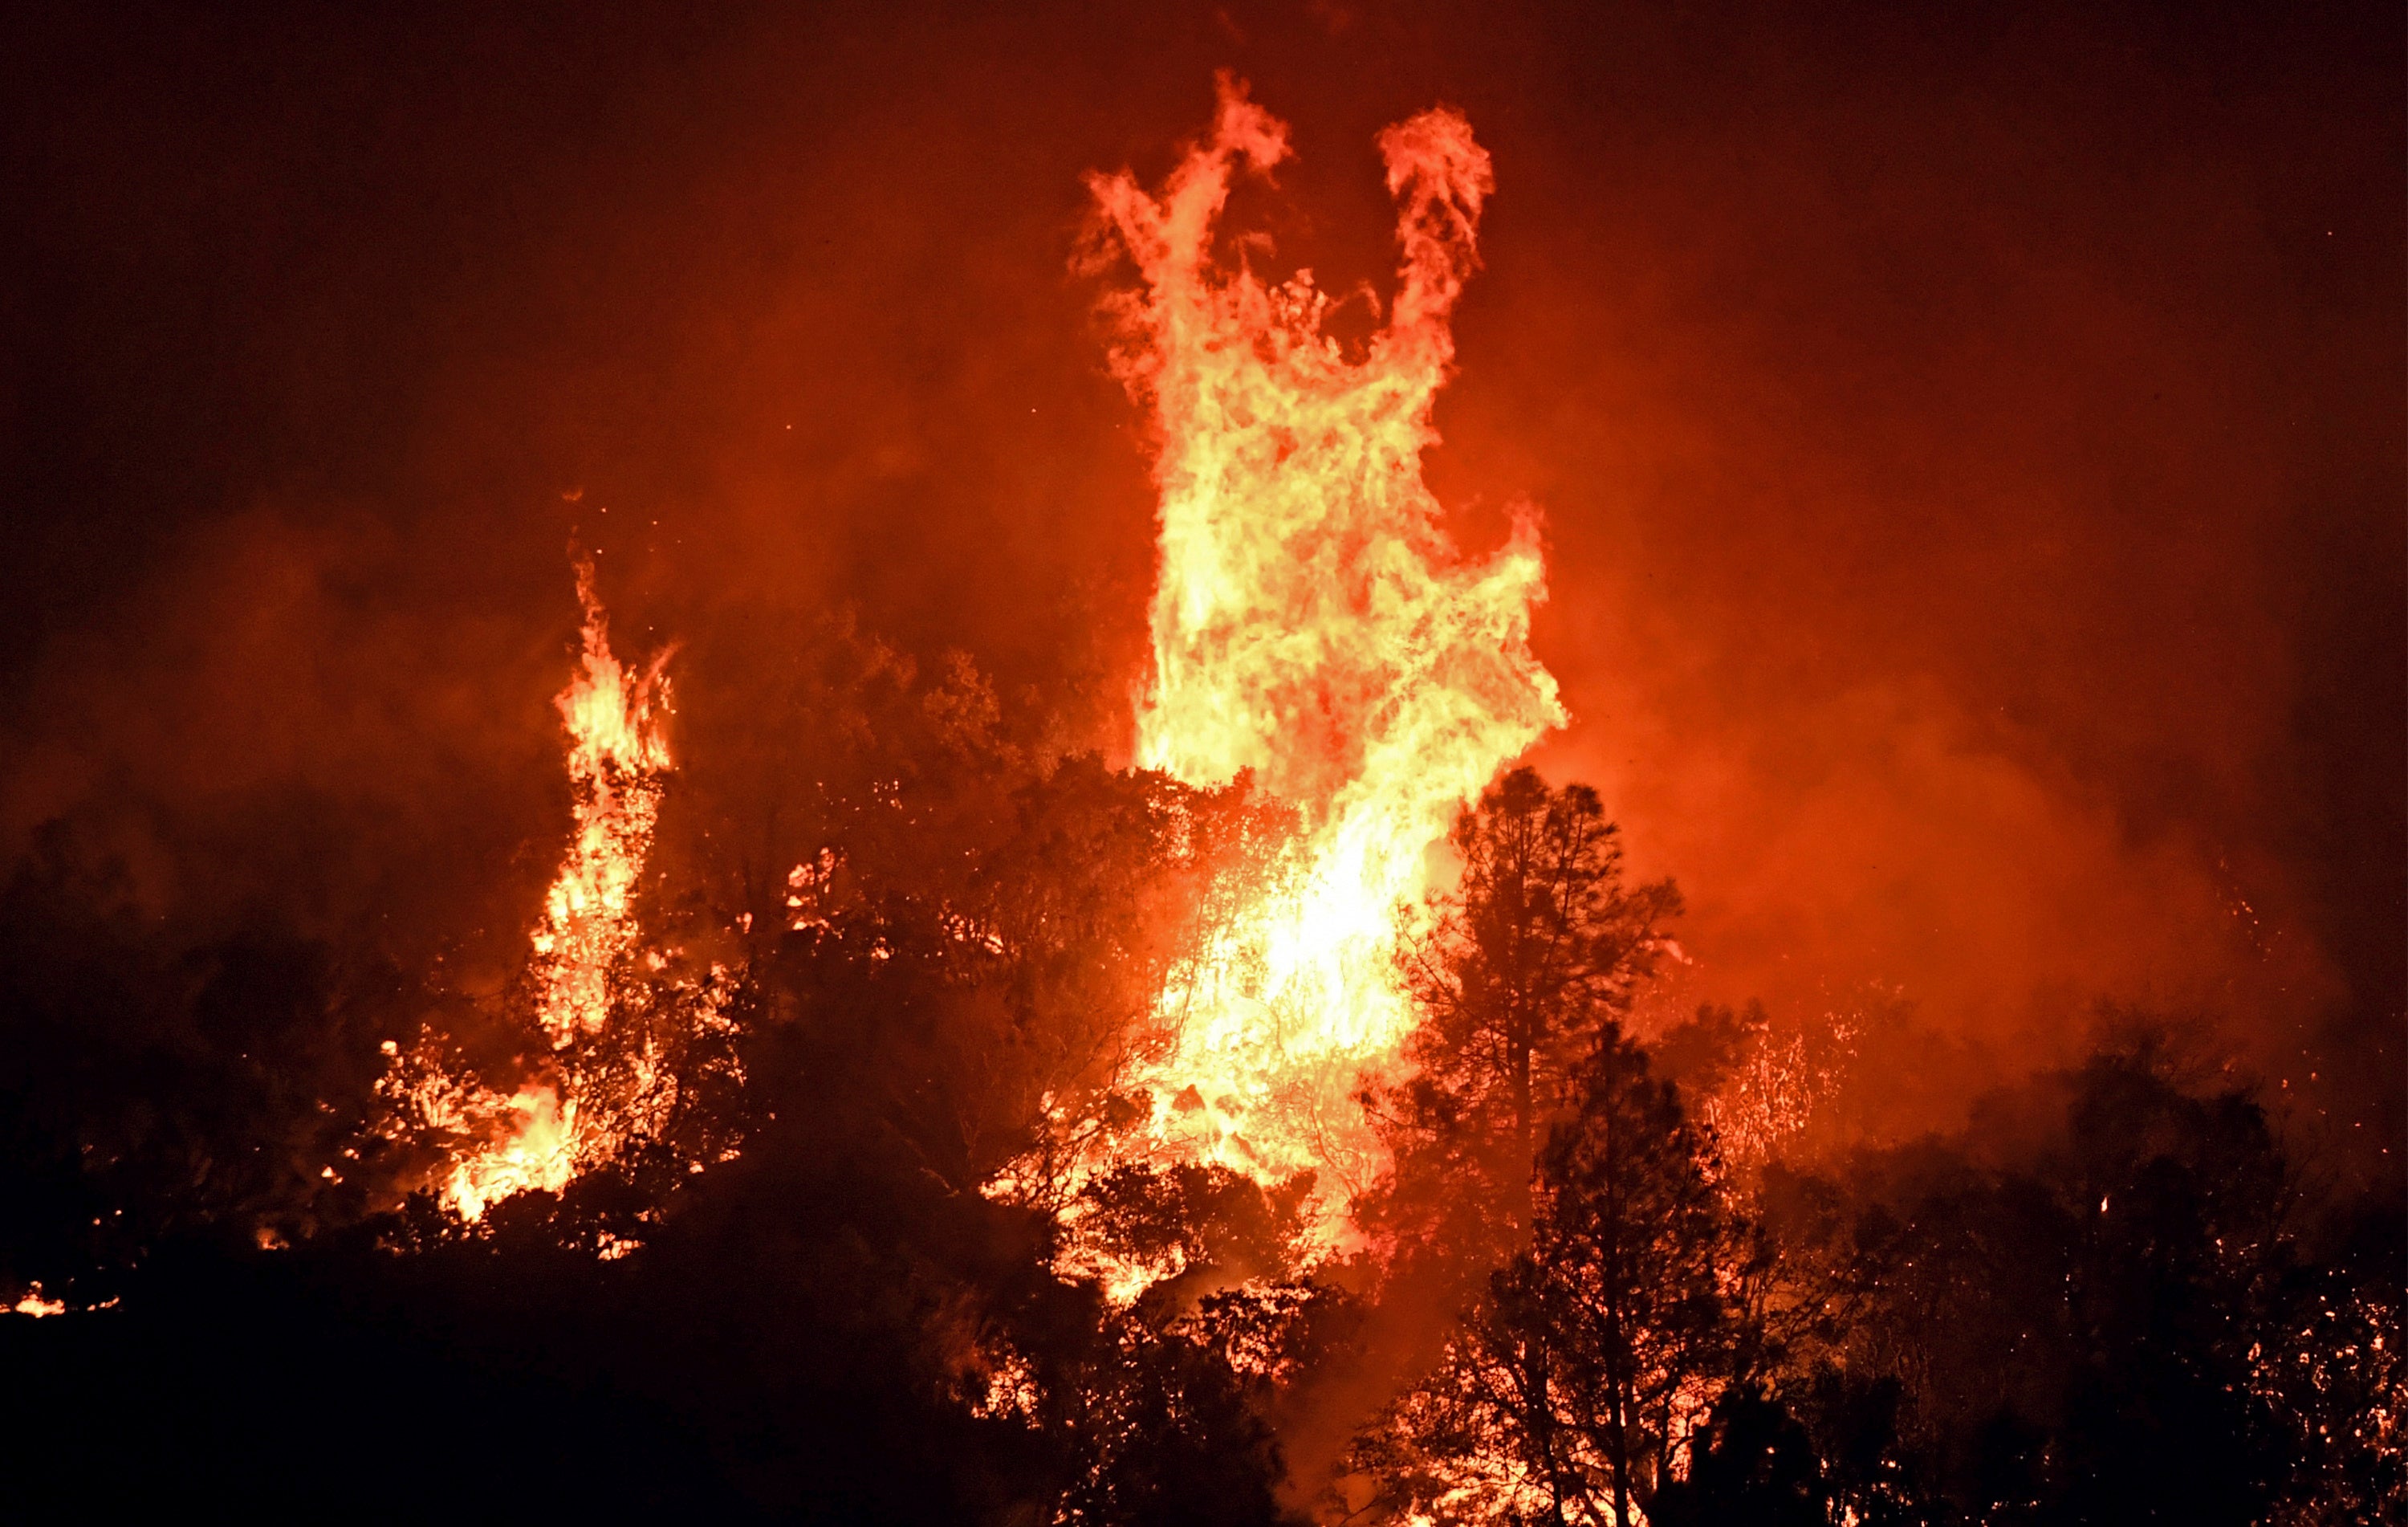 High winds cause tree canopies to flare up as a wildfire burns east of Midpines in Mariposa County, Calif., Friday, July 22, 2022 (Photo: Eric Paul Zamora/The Fresno Bee, AP)